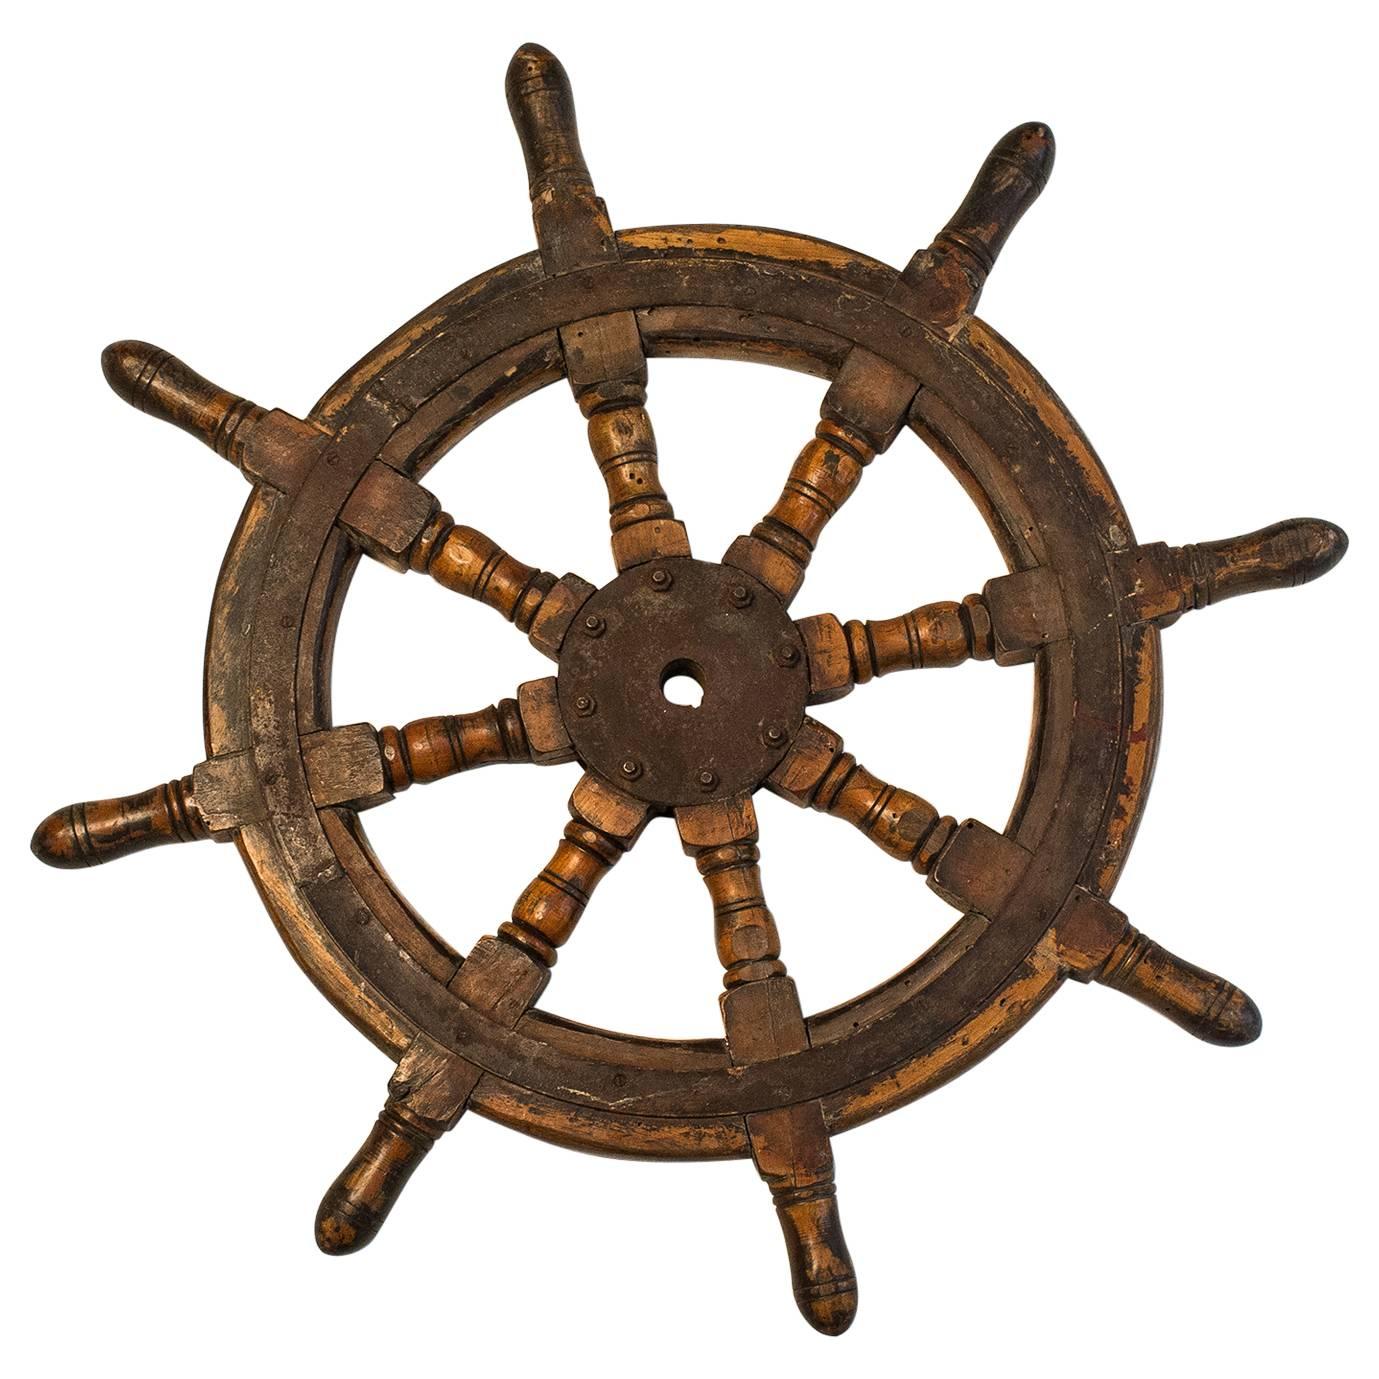 Old Boat Helm or Ship Wheel - for different uses